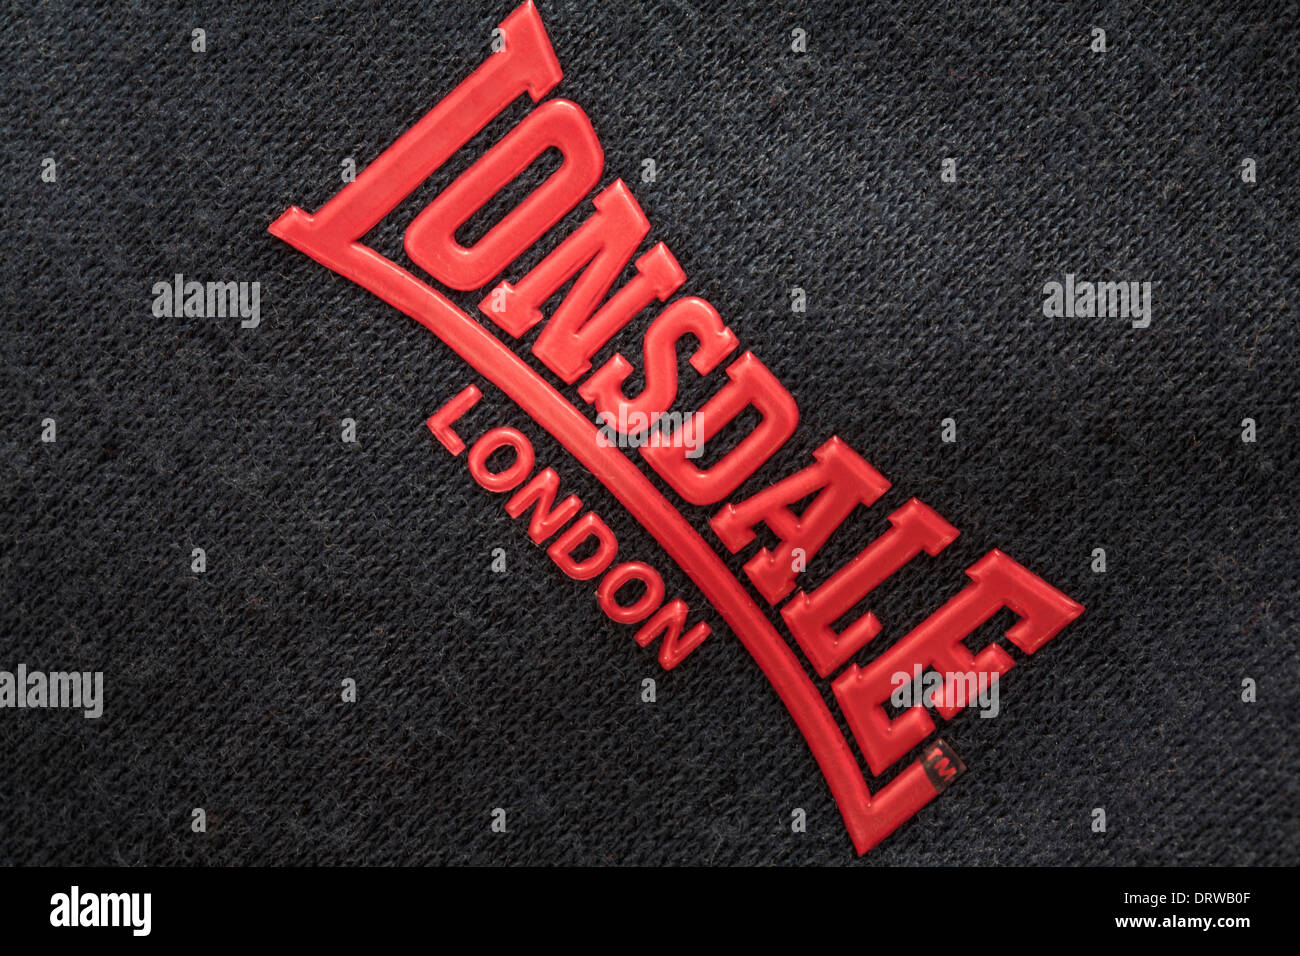 Lonsdale London wallpaper by maul60 - Download on ZEDGE™